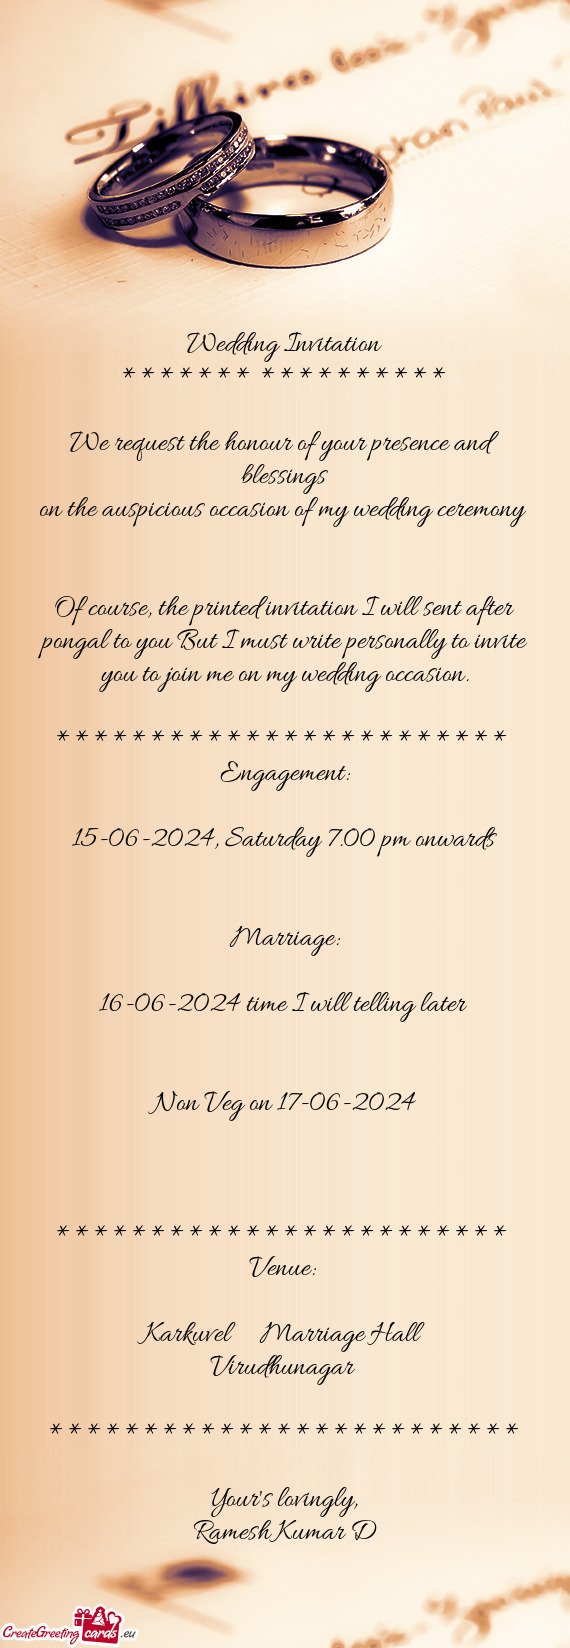 Of course, the printed invitation I will sent after pongal to you But I must write personally to inv